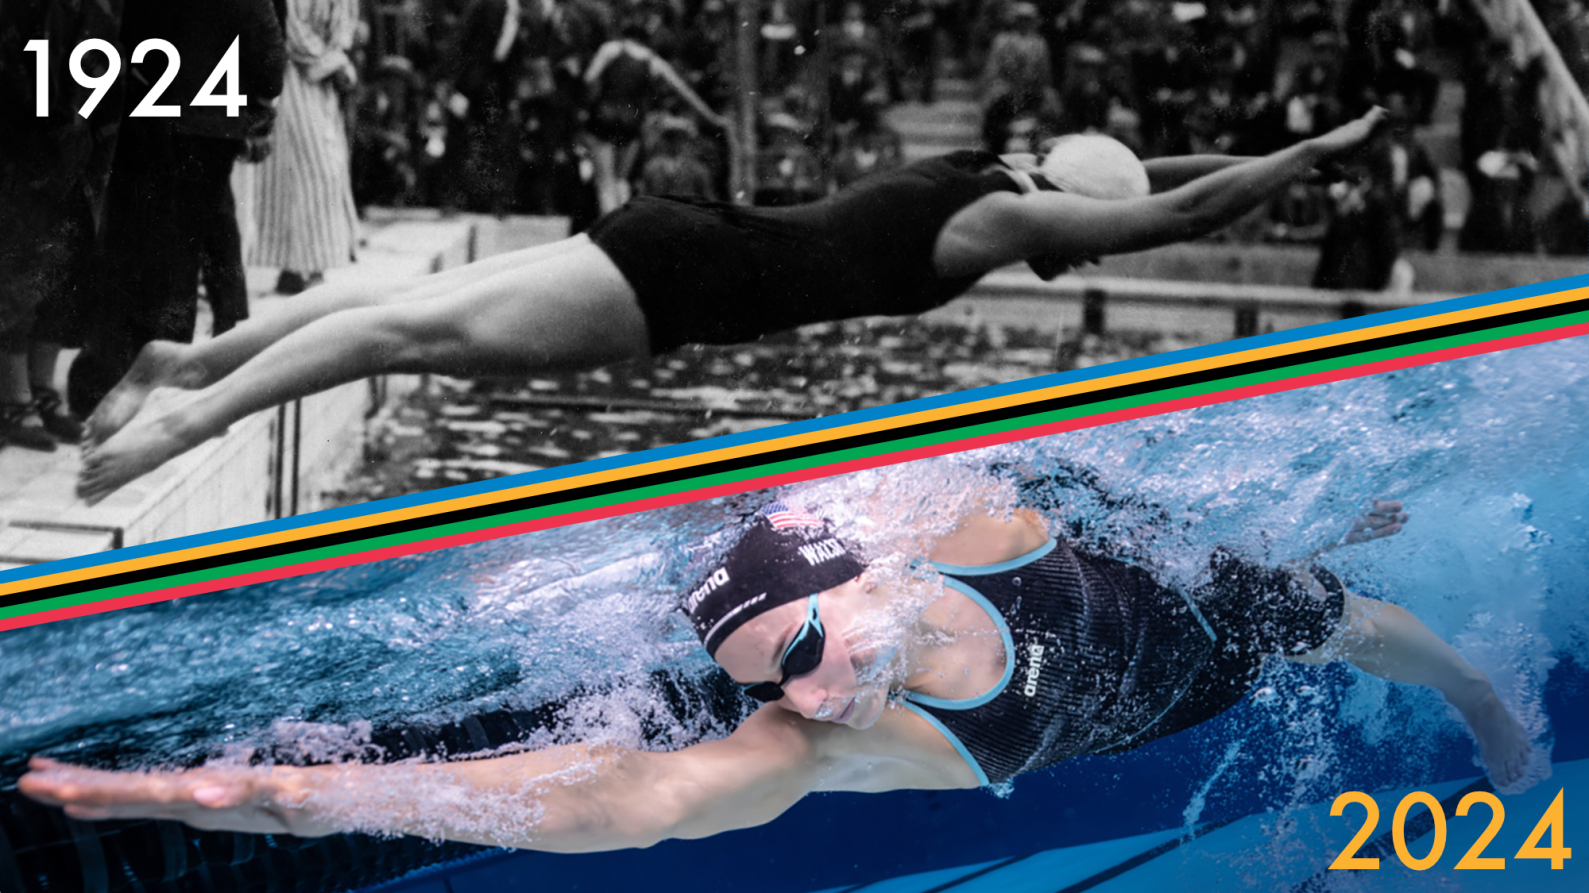 TOP: A relay participant dives off the blocks in the Women’s 4 x 100m final during the Paris 1924 Olympic Games. BOTTOM: American Alex Walsh swims in Arena’s Powerskin Primo.